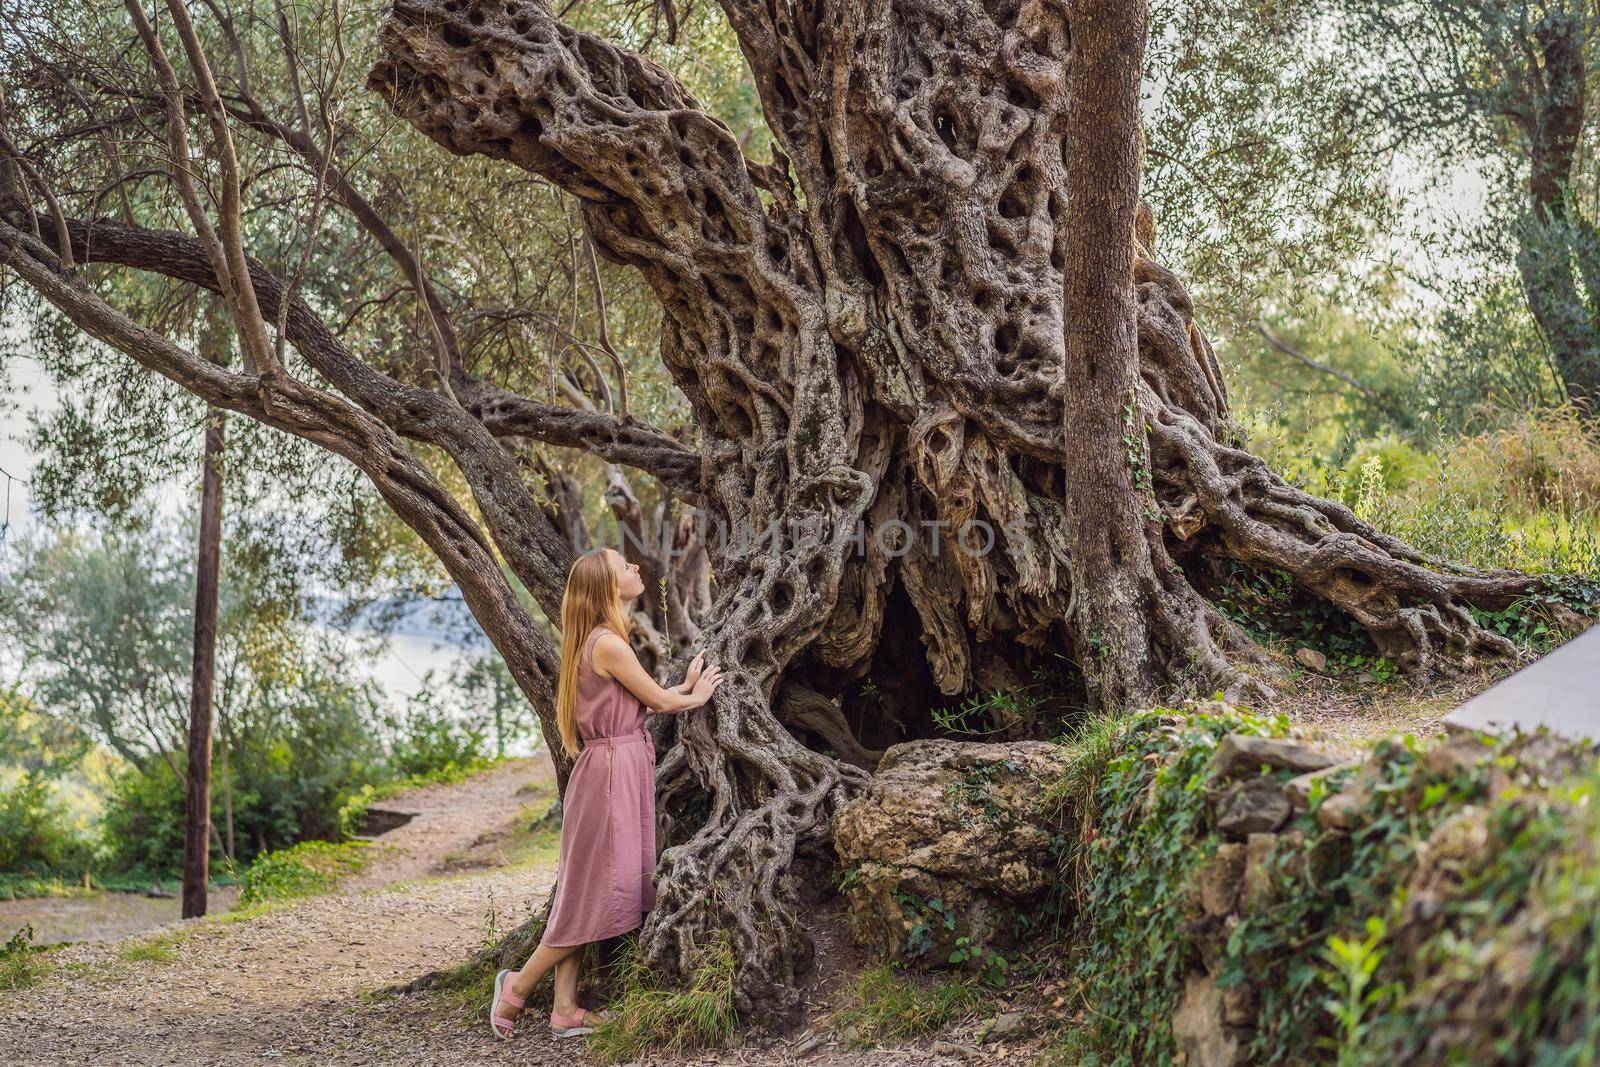 woman tourist looking at 2000 years old olive tree: Stara Maslina in Budva, Montenegro. It is thought to be the oldest tree in Europe and is a tourist attraction. In the background the montenegrin mountains. Europe.